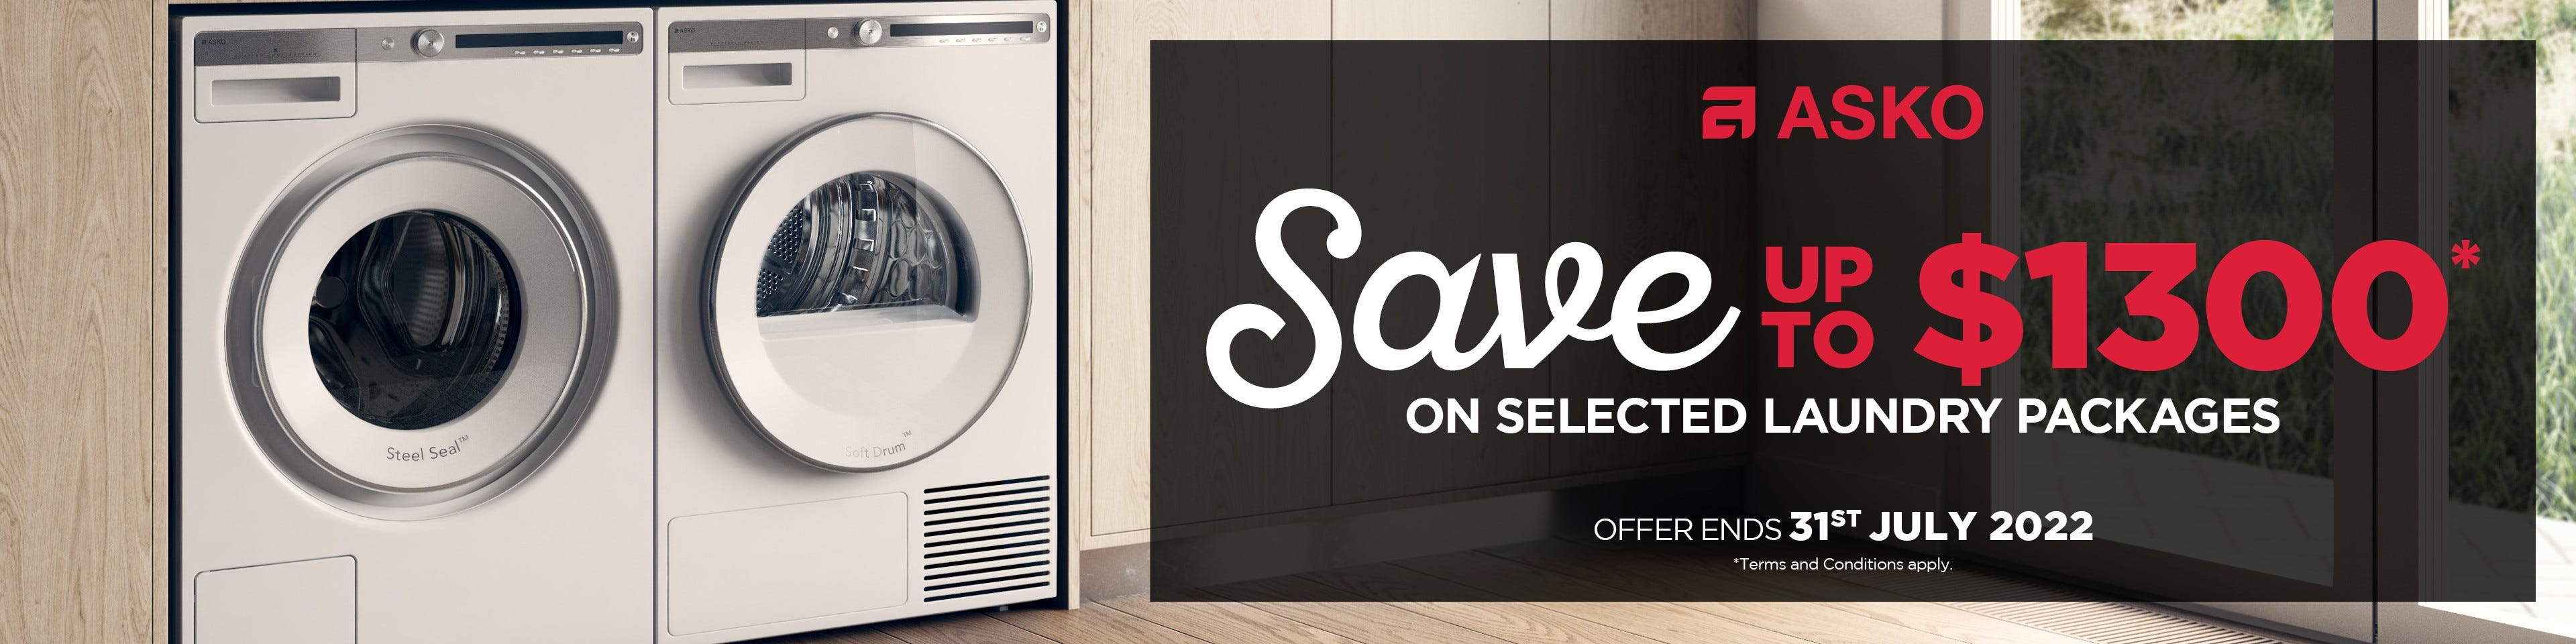 Save up to $1300* on selected ASKO Laundry Packages with e&s. Offer ends 31/07/22. Find out more at an e&s near you today.